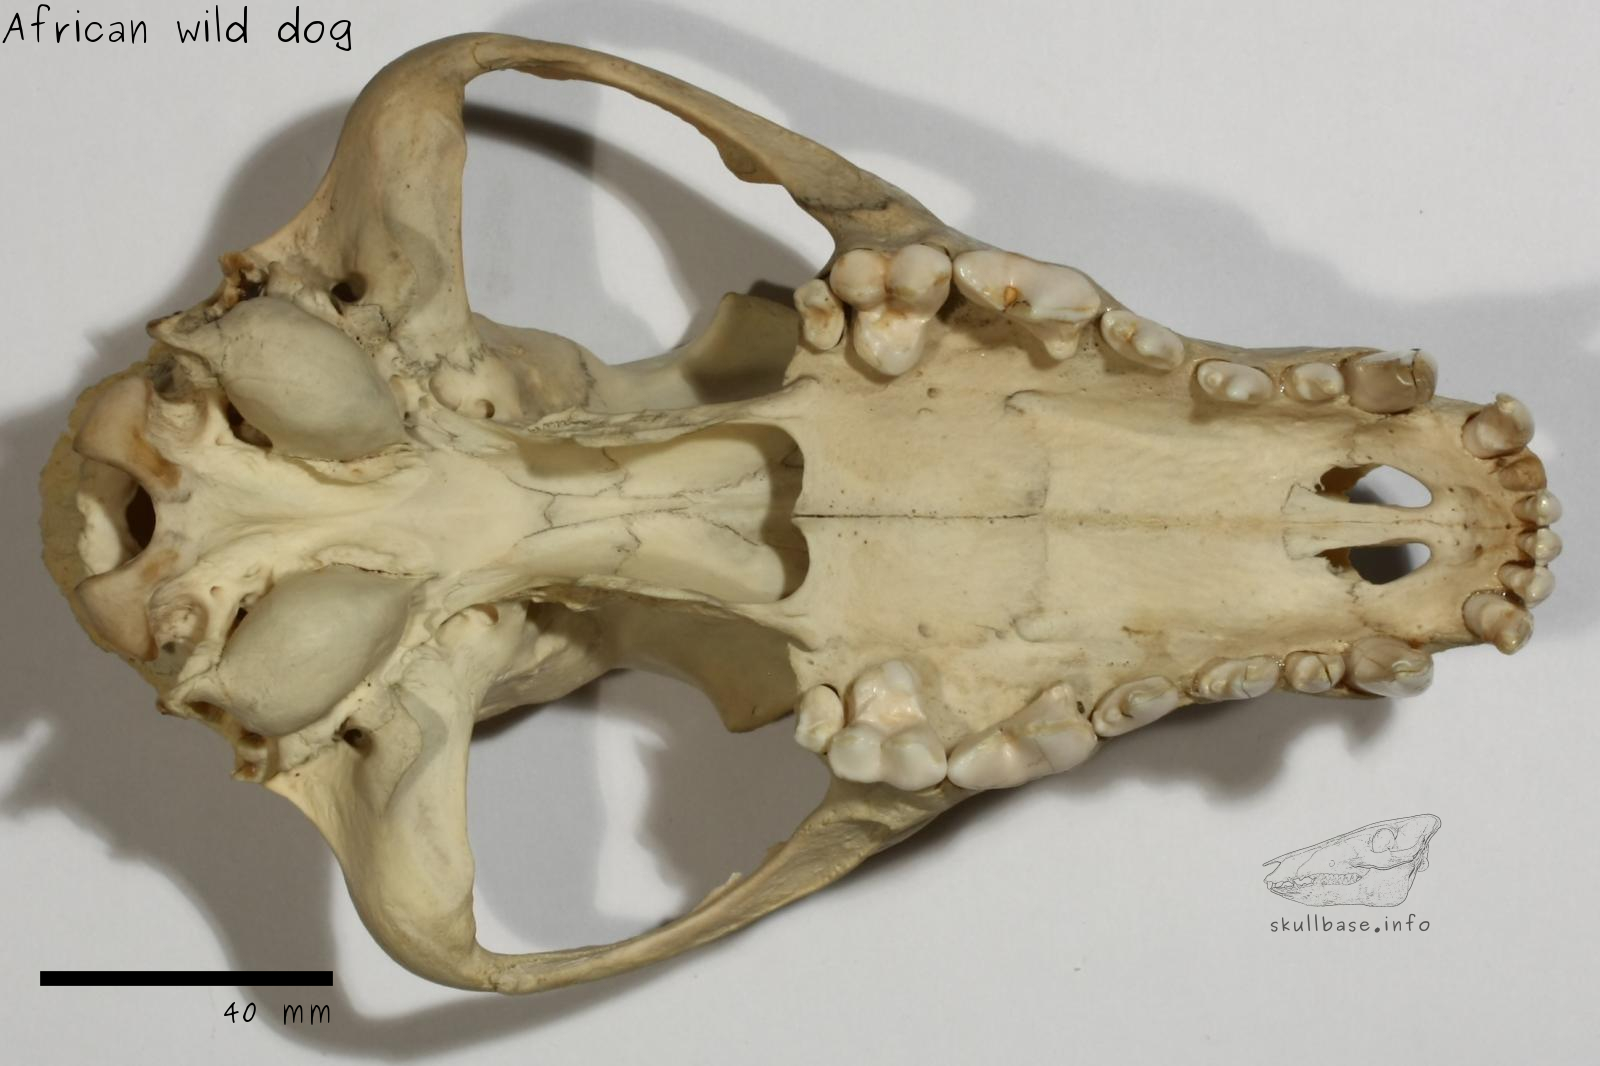 African wild dog (Lycaon pictus) skull ventral view